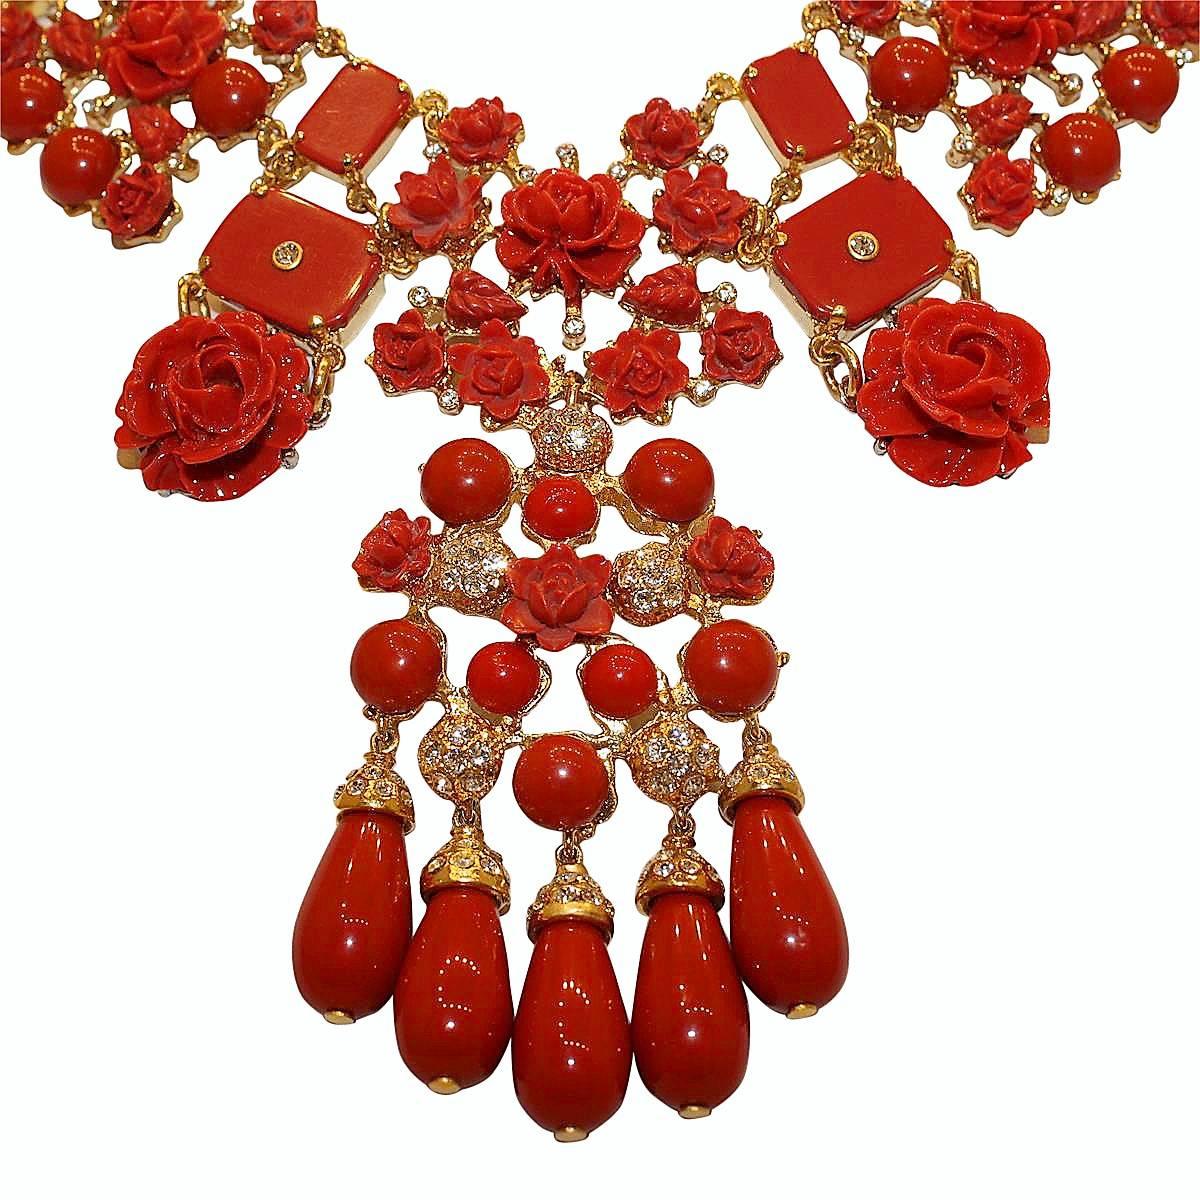 Amazing and unique Carlo Zini bijoux collar
One of the world's greatest bijoux designers
Non allergenic rhodium
Roses theme
Golden deeped
Amazing creation of rhinestones and coral resins
100% Artisanal work
Unique piece !
Condition: New from